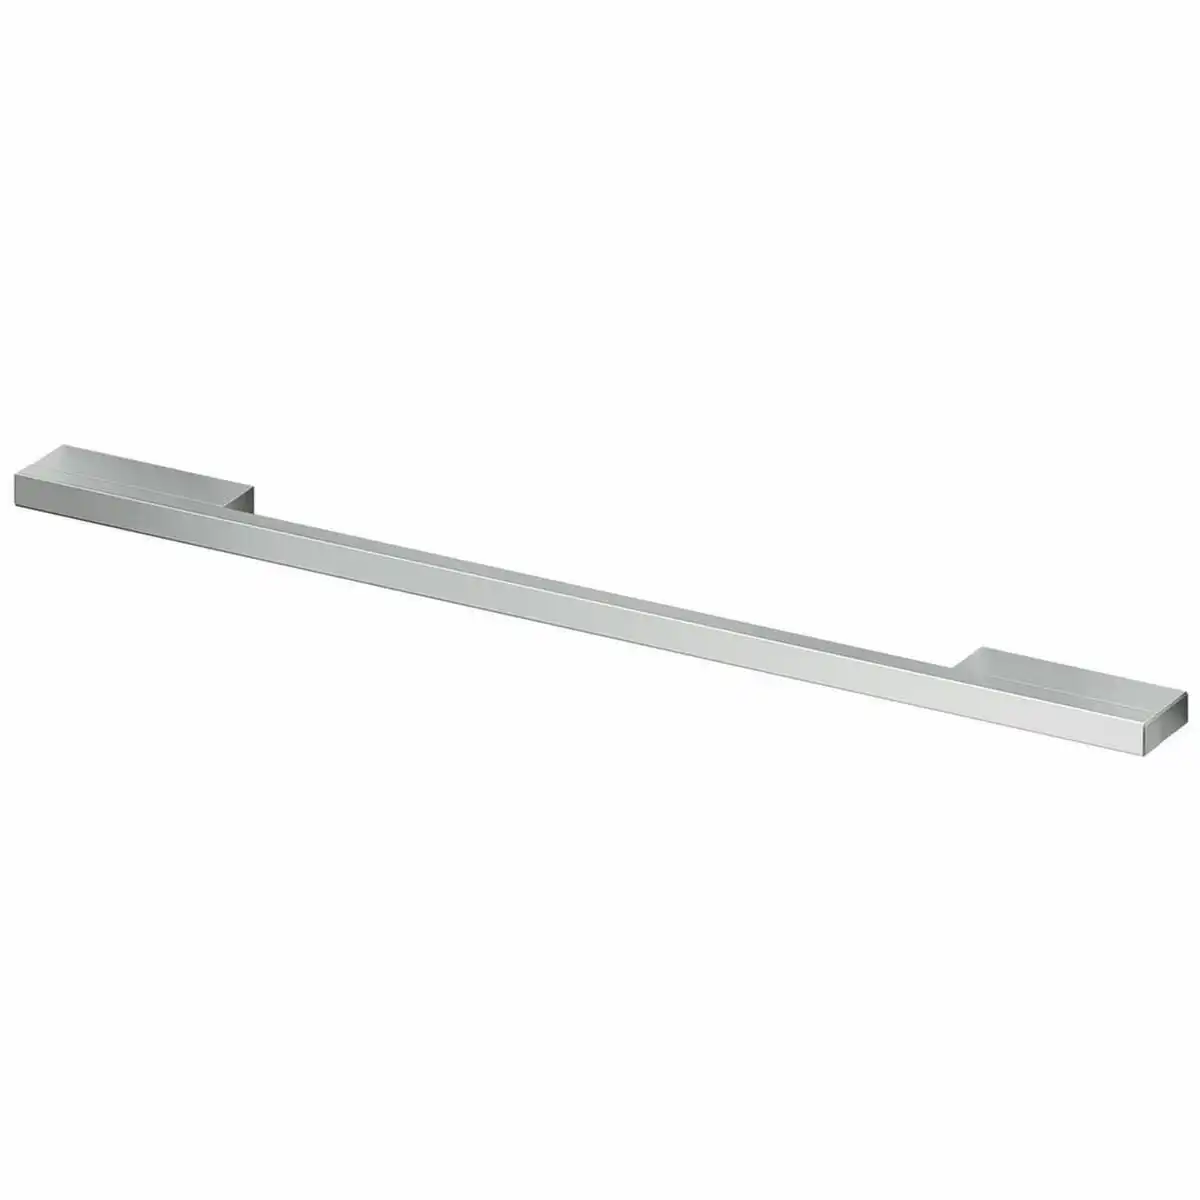 Fisher & Paykel Contemporary Square CoolDrawer Handle Kit